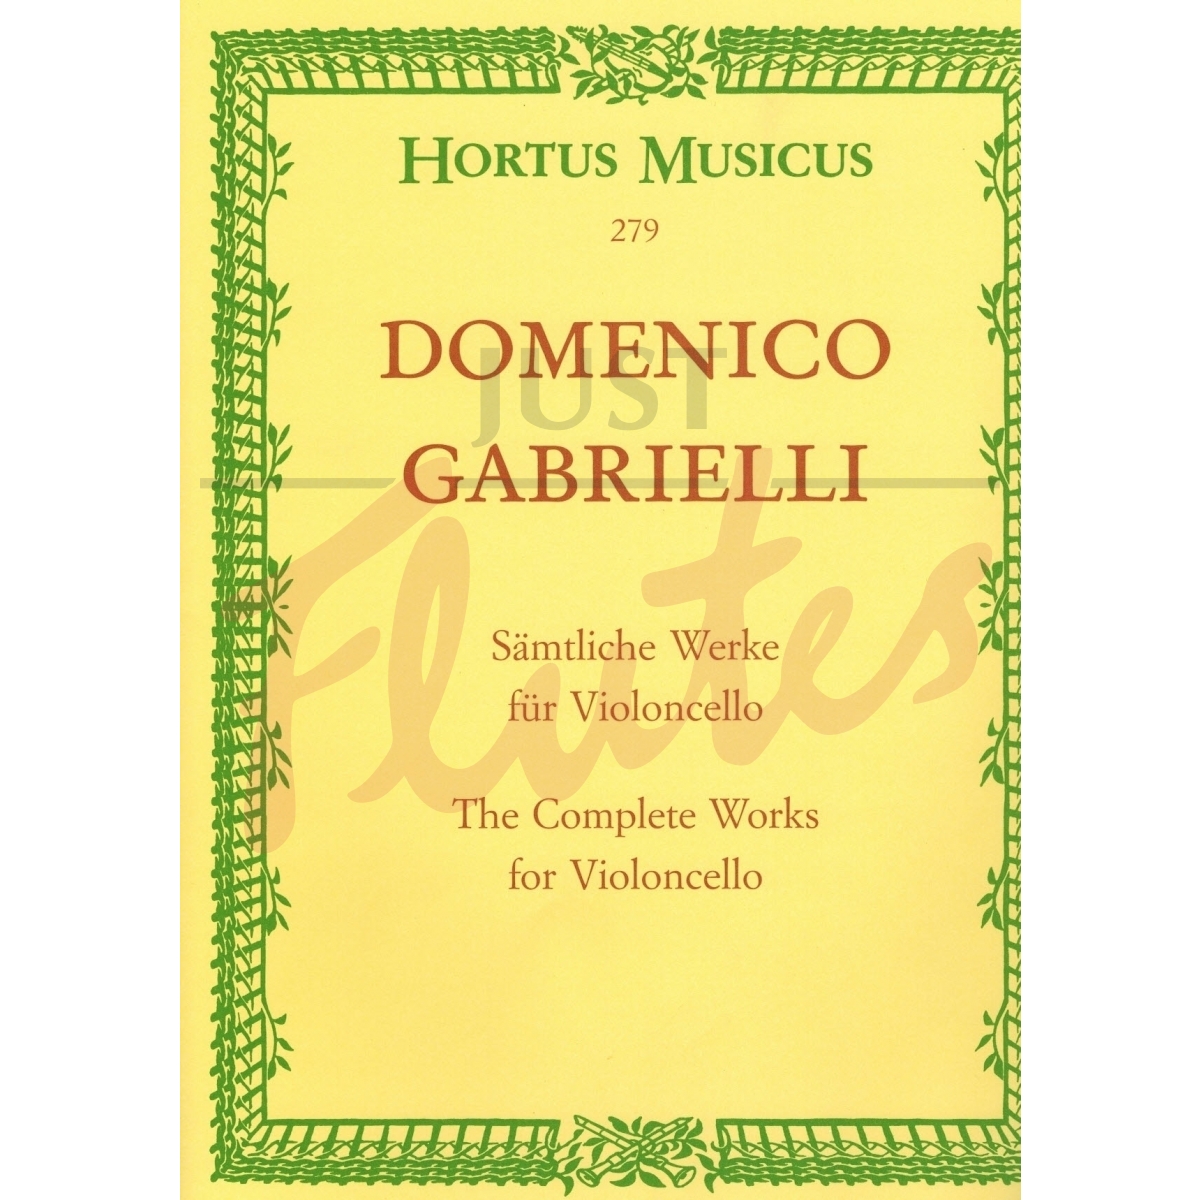 The Complete Works for Violoncello